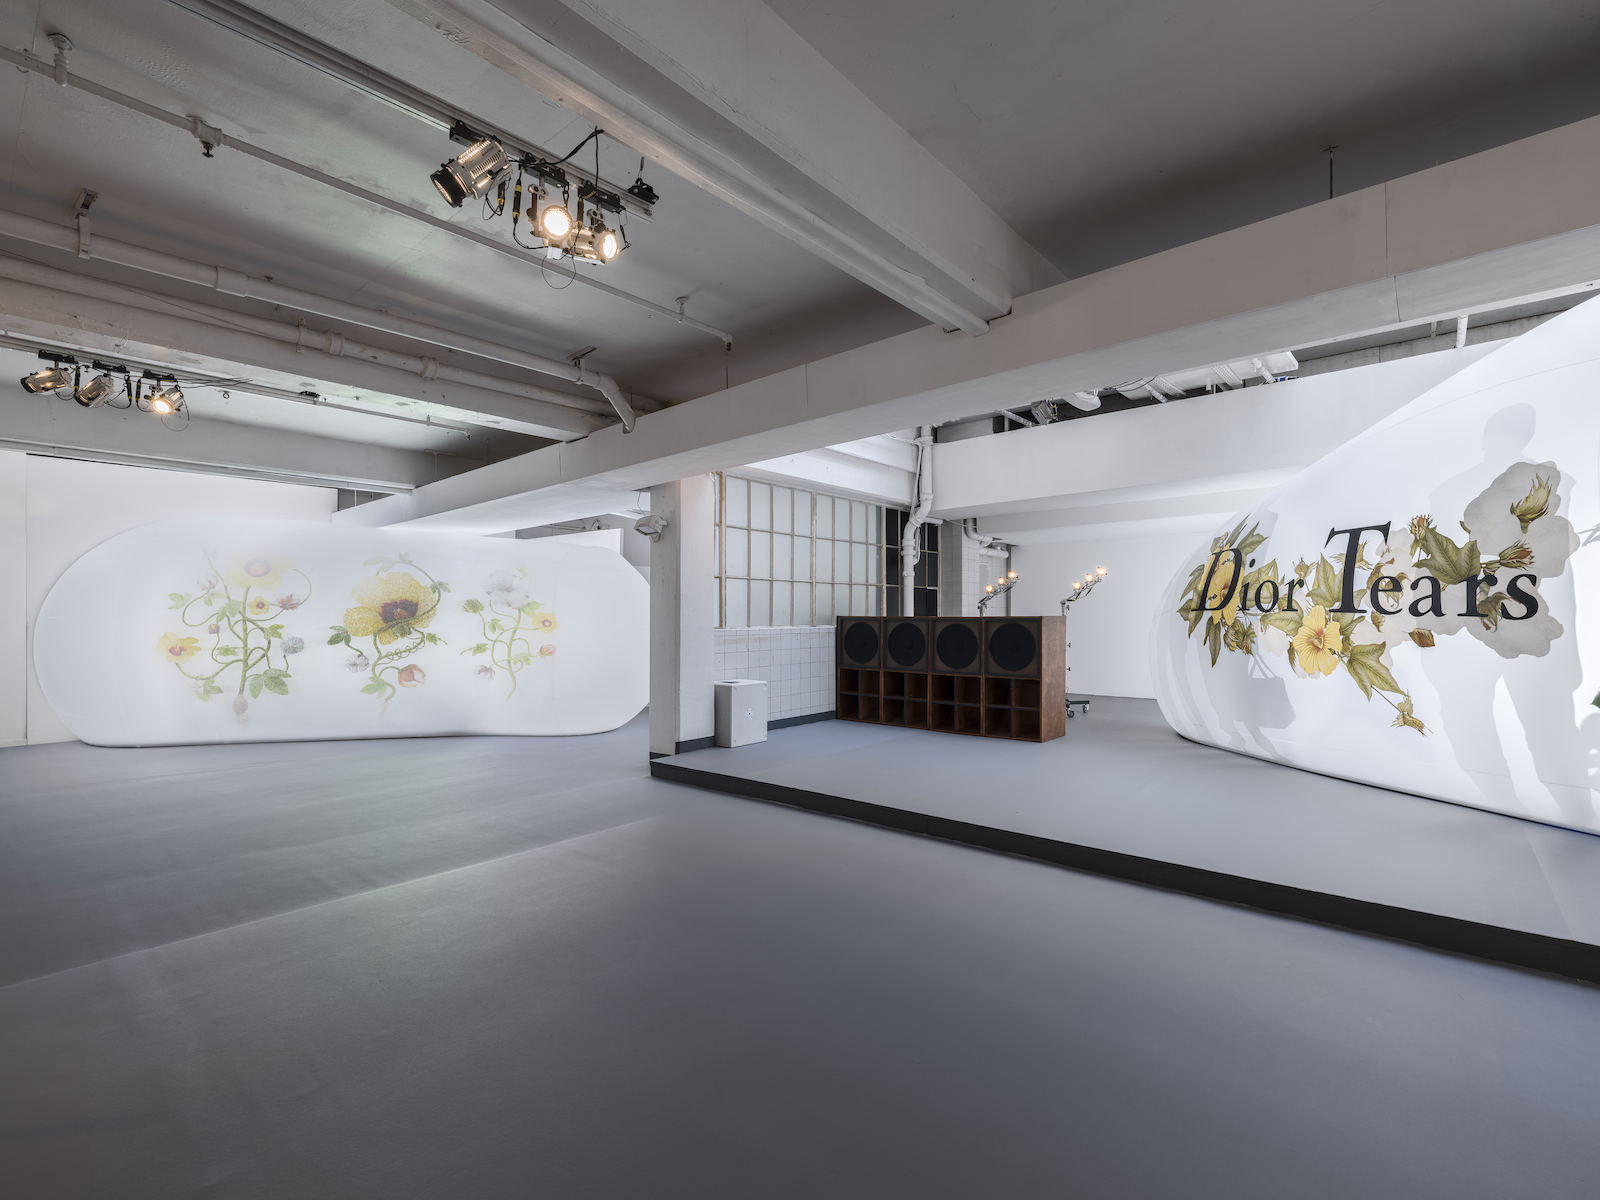 Dior opens pop-up in London for Dior Tears collaboration